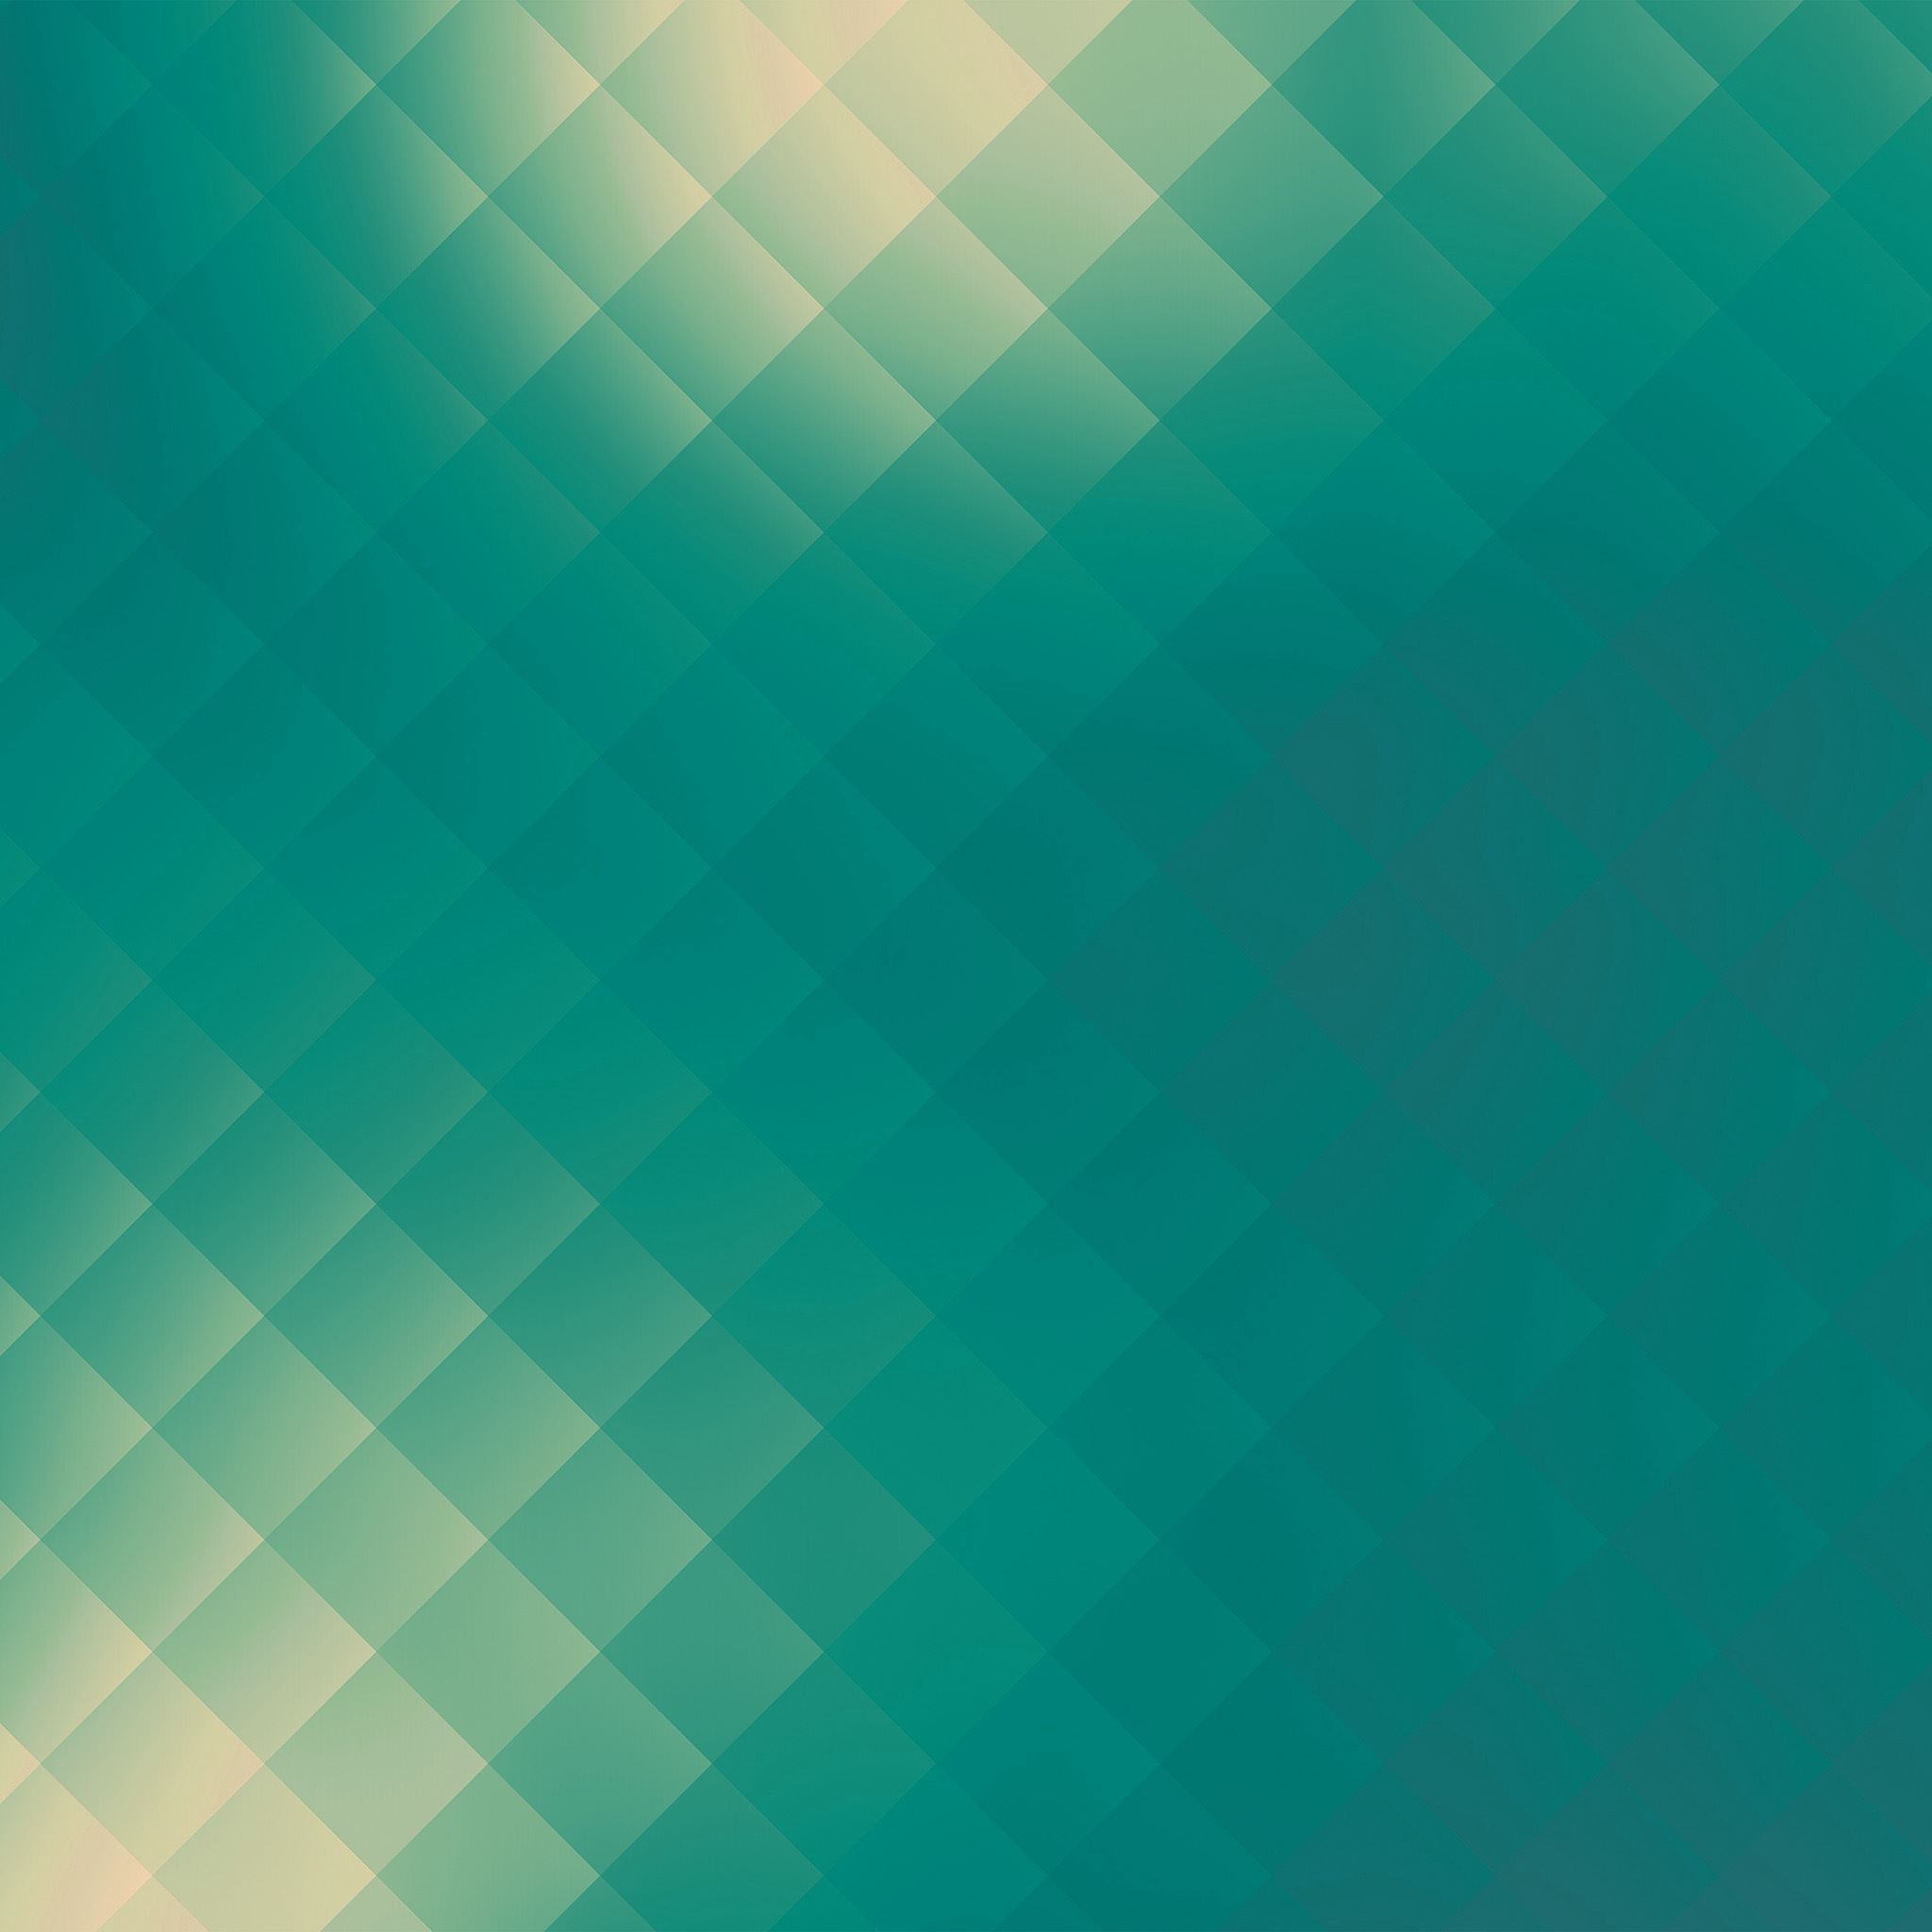 Square Party Green Soft Abstract Pattern iPad Air wallpaper 